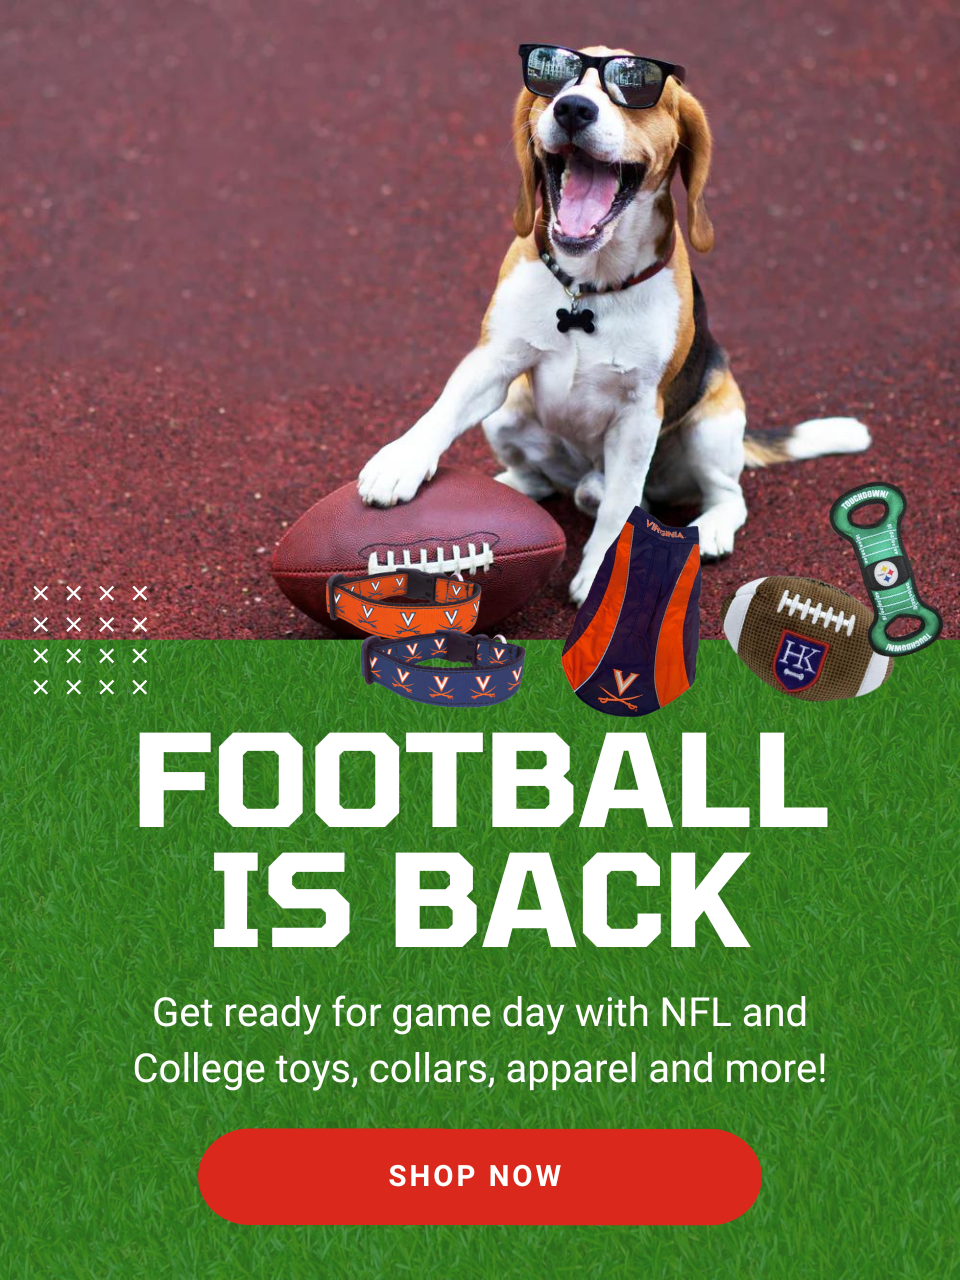 Football is back! Get ready for game day with NFL and College toys, collars, apparel and more! Shop now!